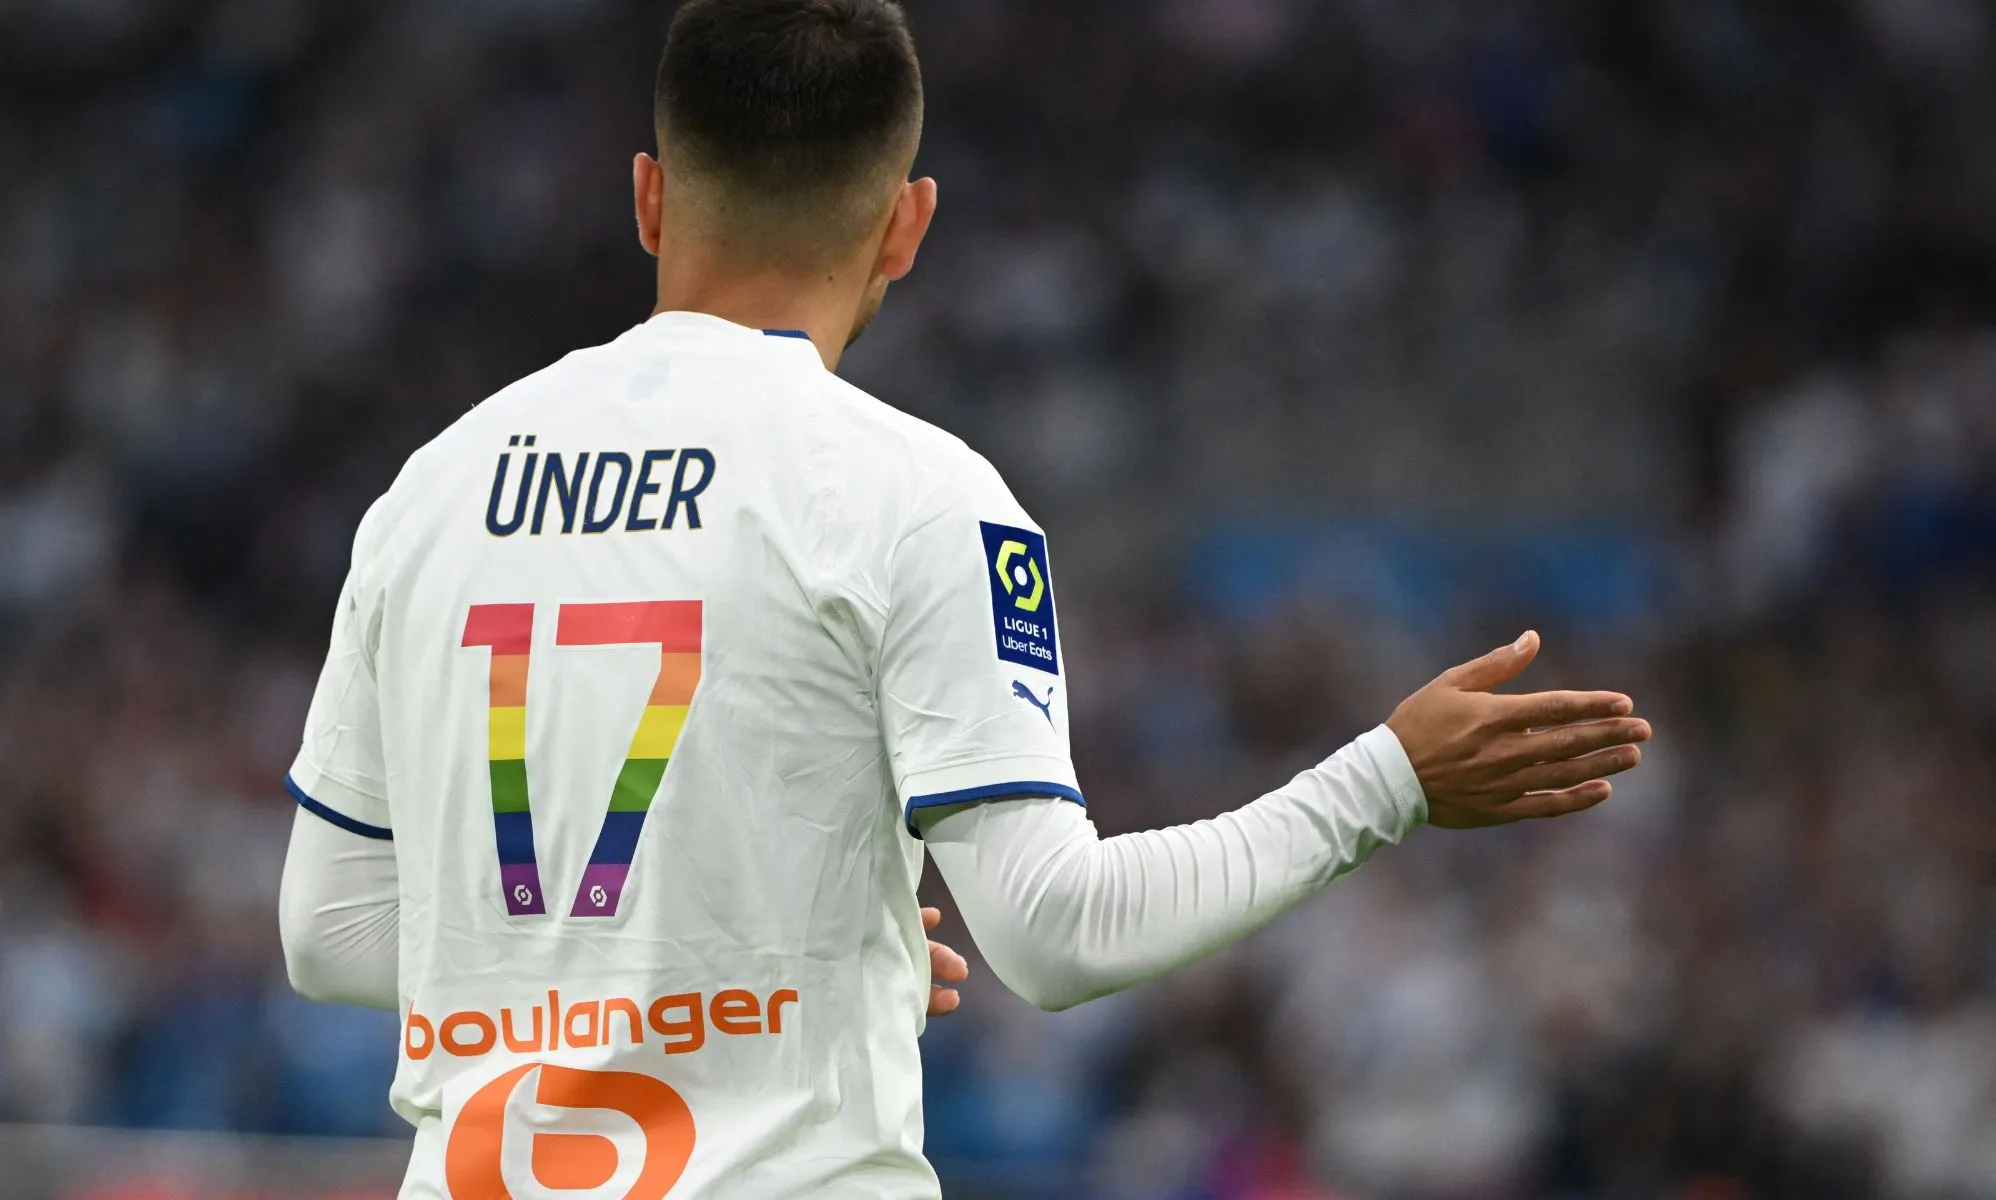 Toulouse players refusing to wear Pride kit is horrifying for gay fans picture